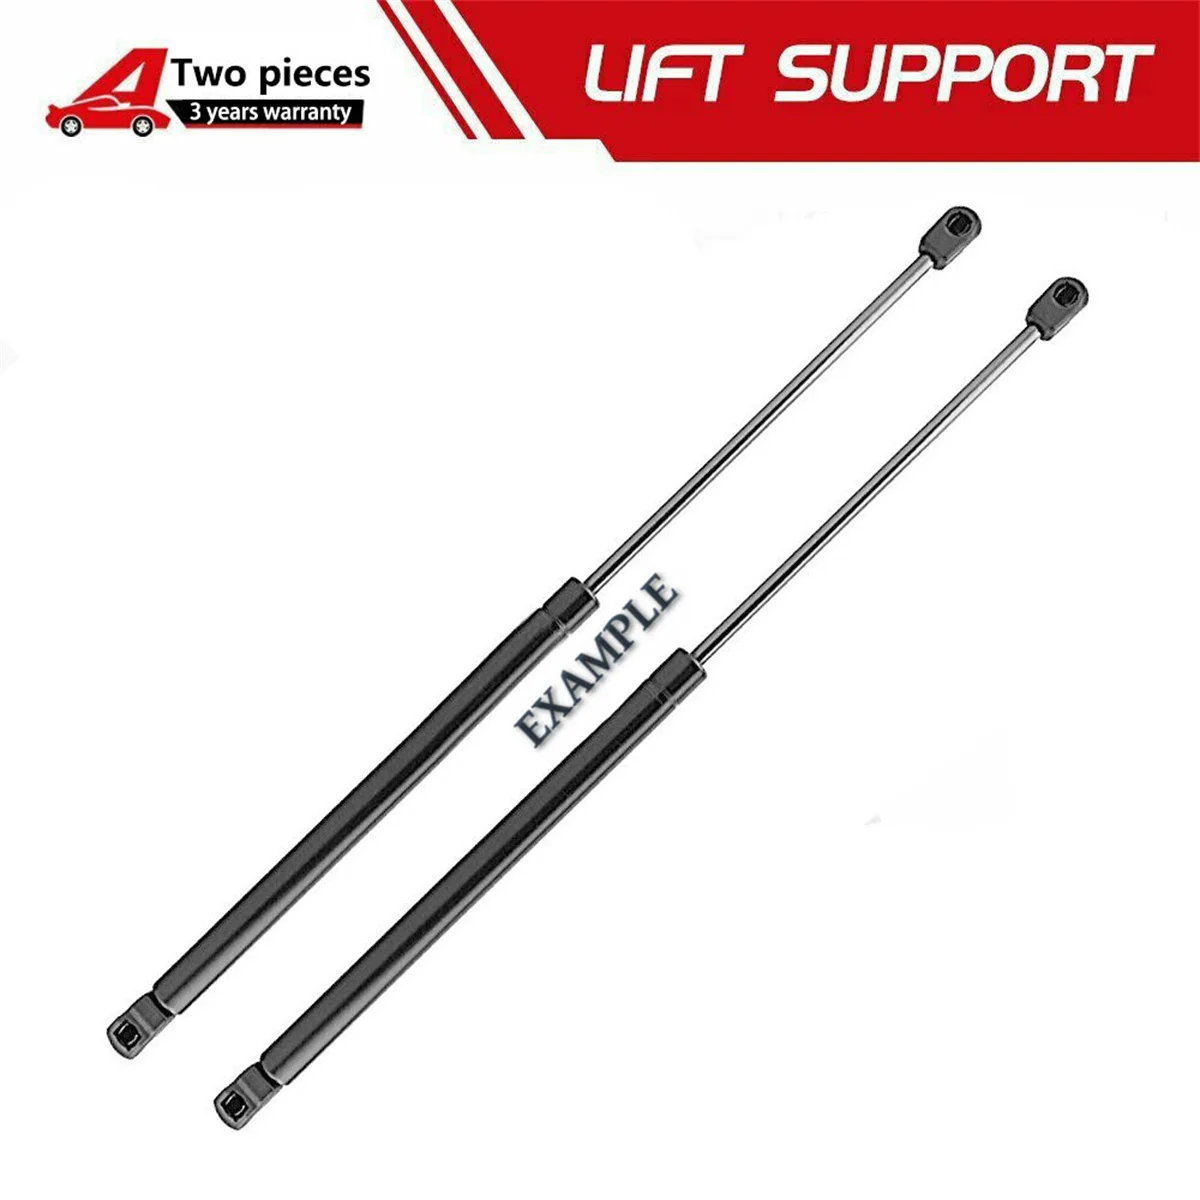 

2 Rear Hatch Liftgate Door Lift Supports Shocks Struts For Toyota Sienna 2004 05 06 07 2008 2009 2010 Extended Length [in] 25.06